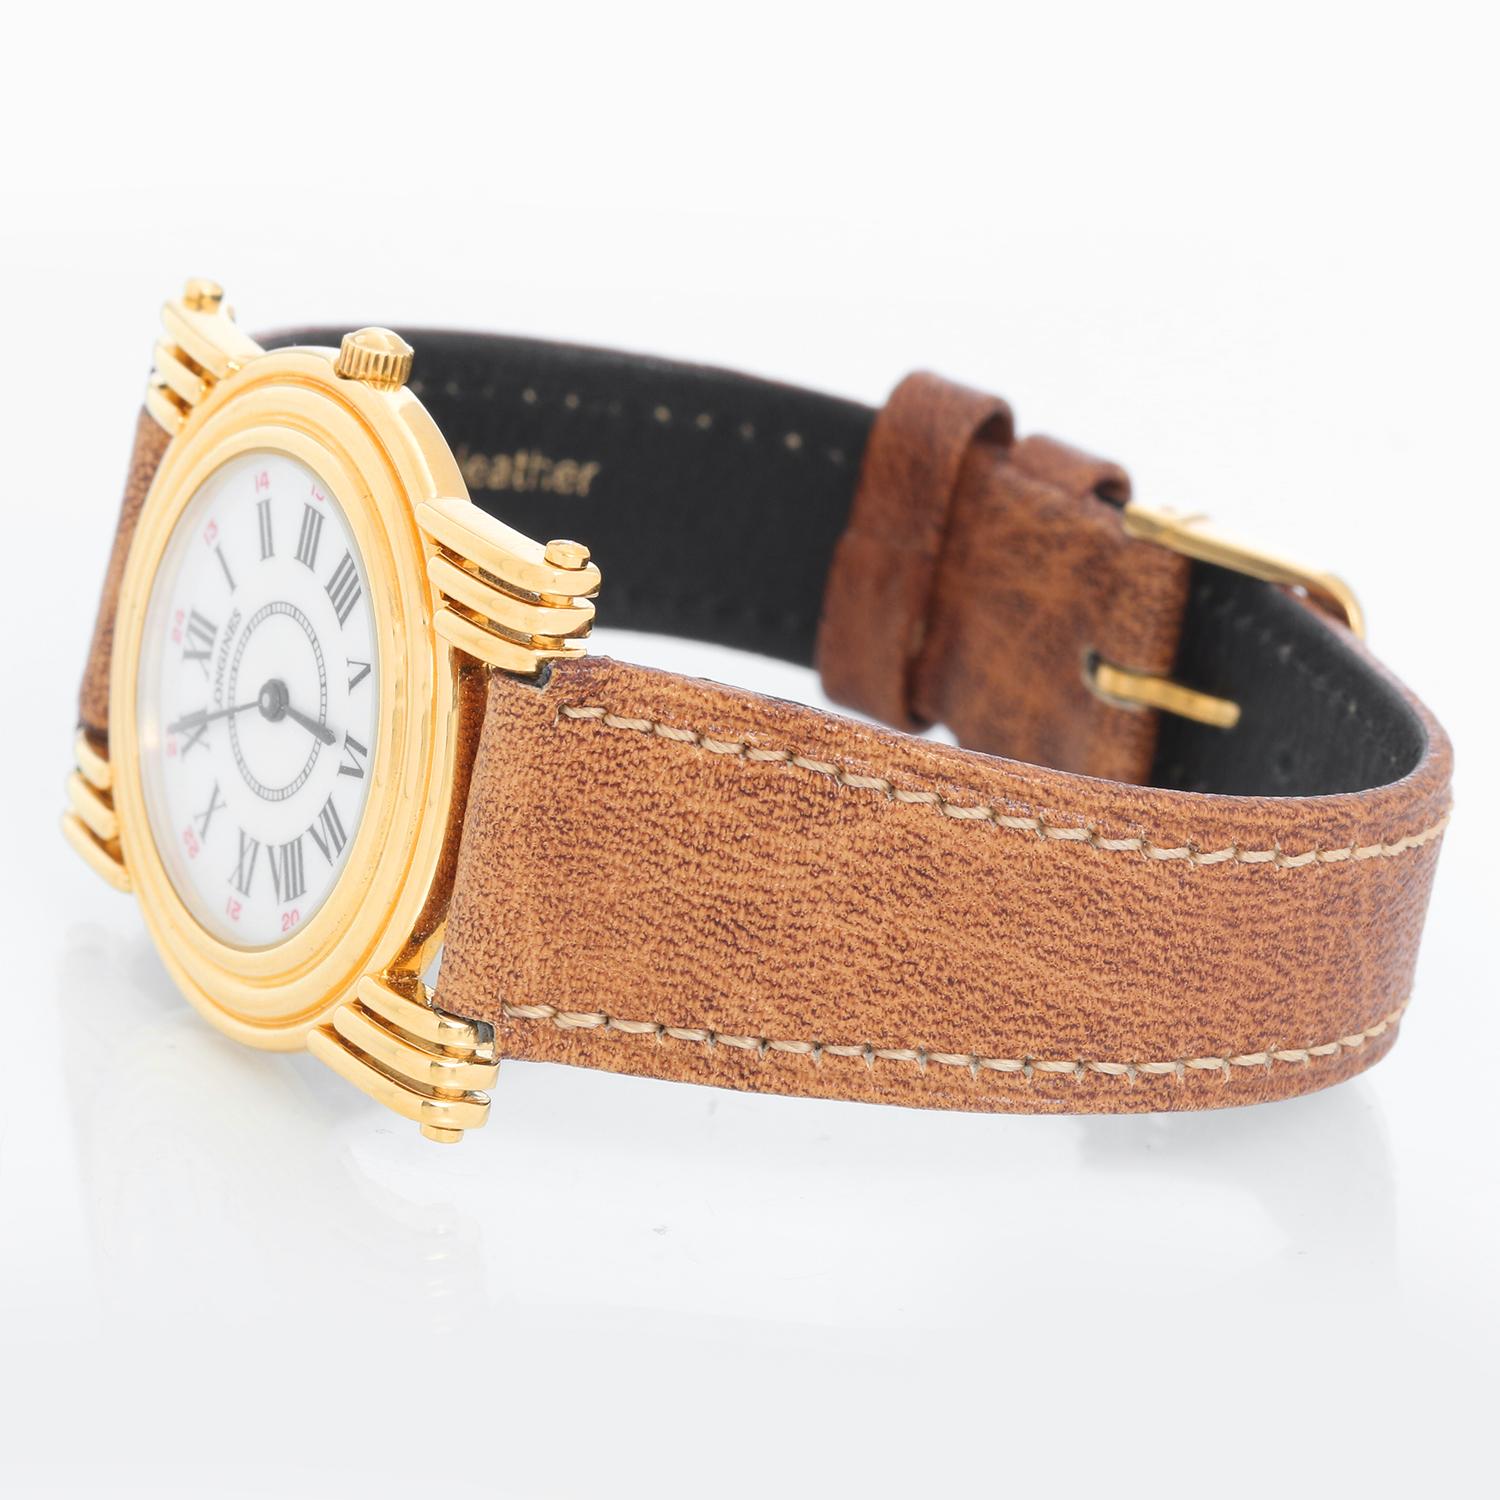 Longines Gold Plated Quartz Watch - Quartz. Gold plated ( 32 x 38 mm ). White dial with Roman numerals. Longines brown leather band. Pre-owned with Longines box. 